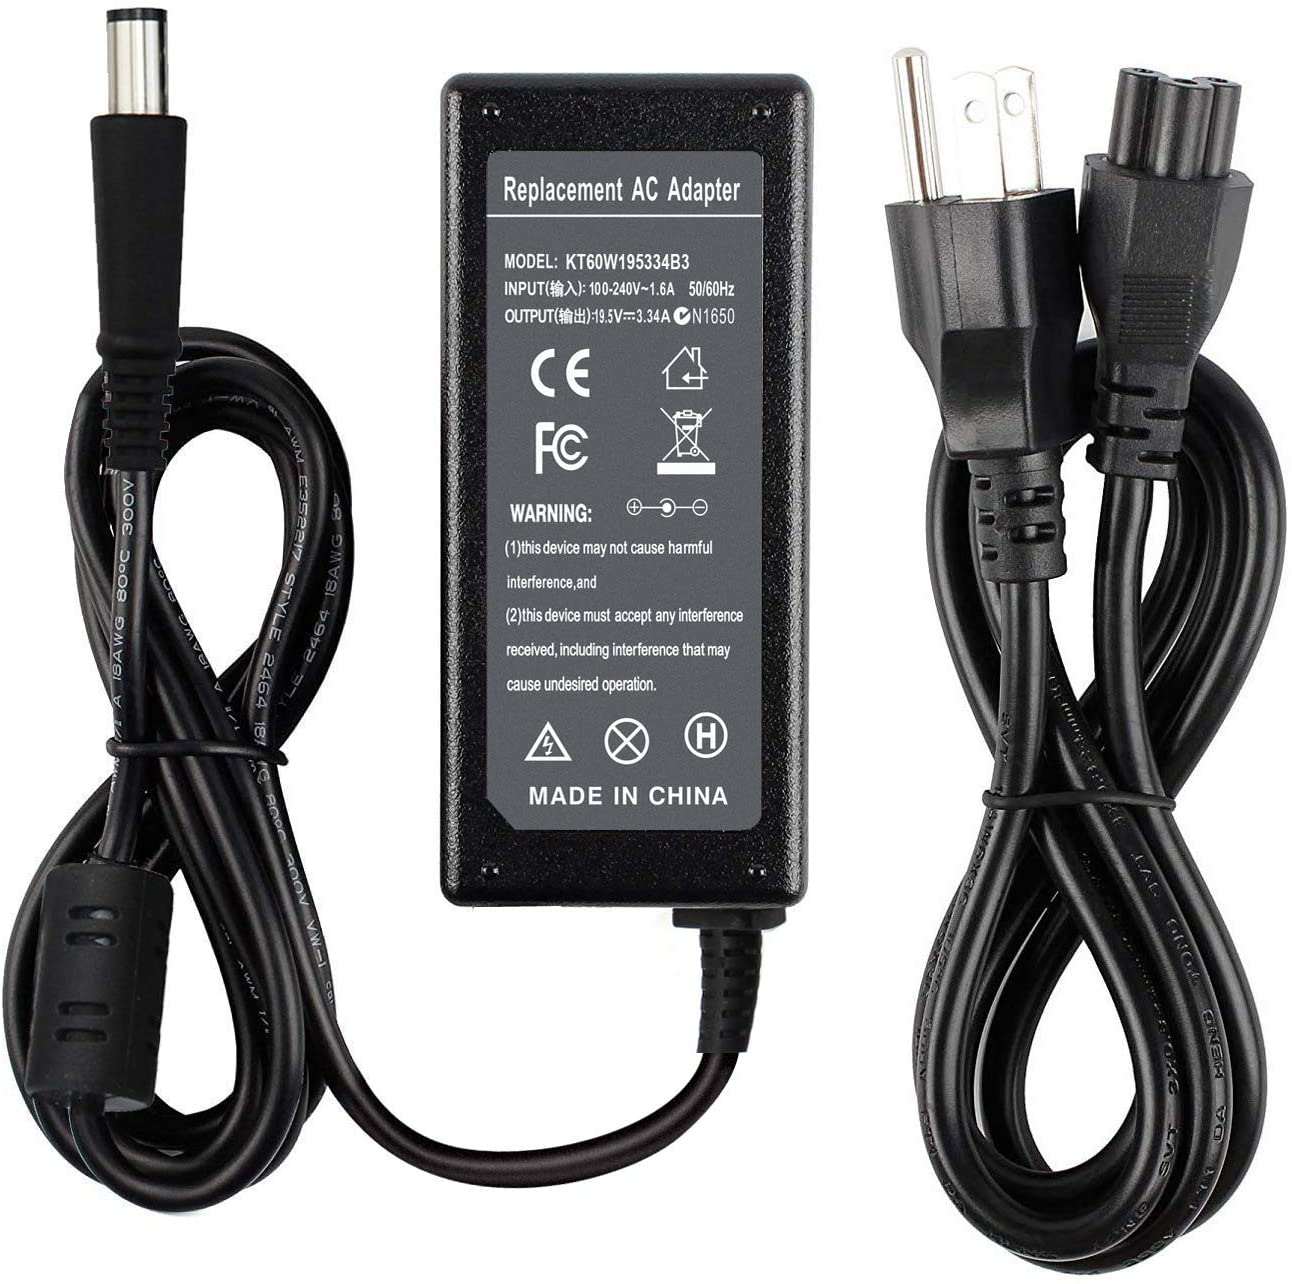 The best Dell E5520 laptop charger